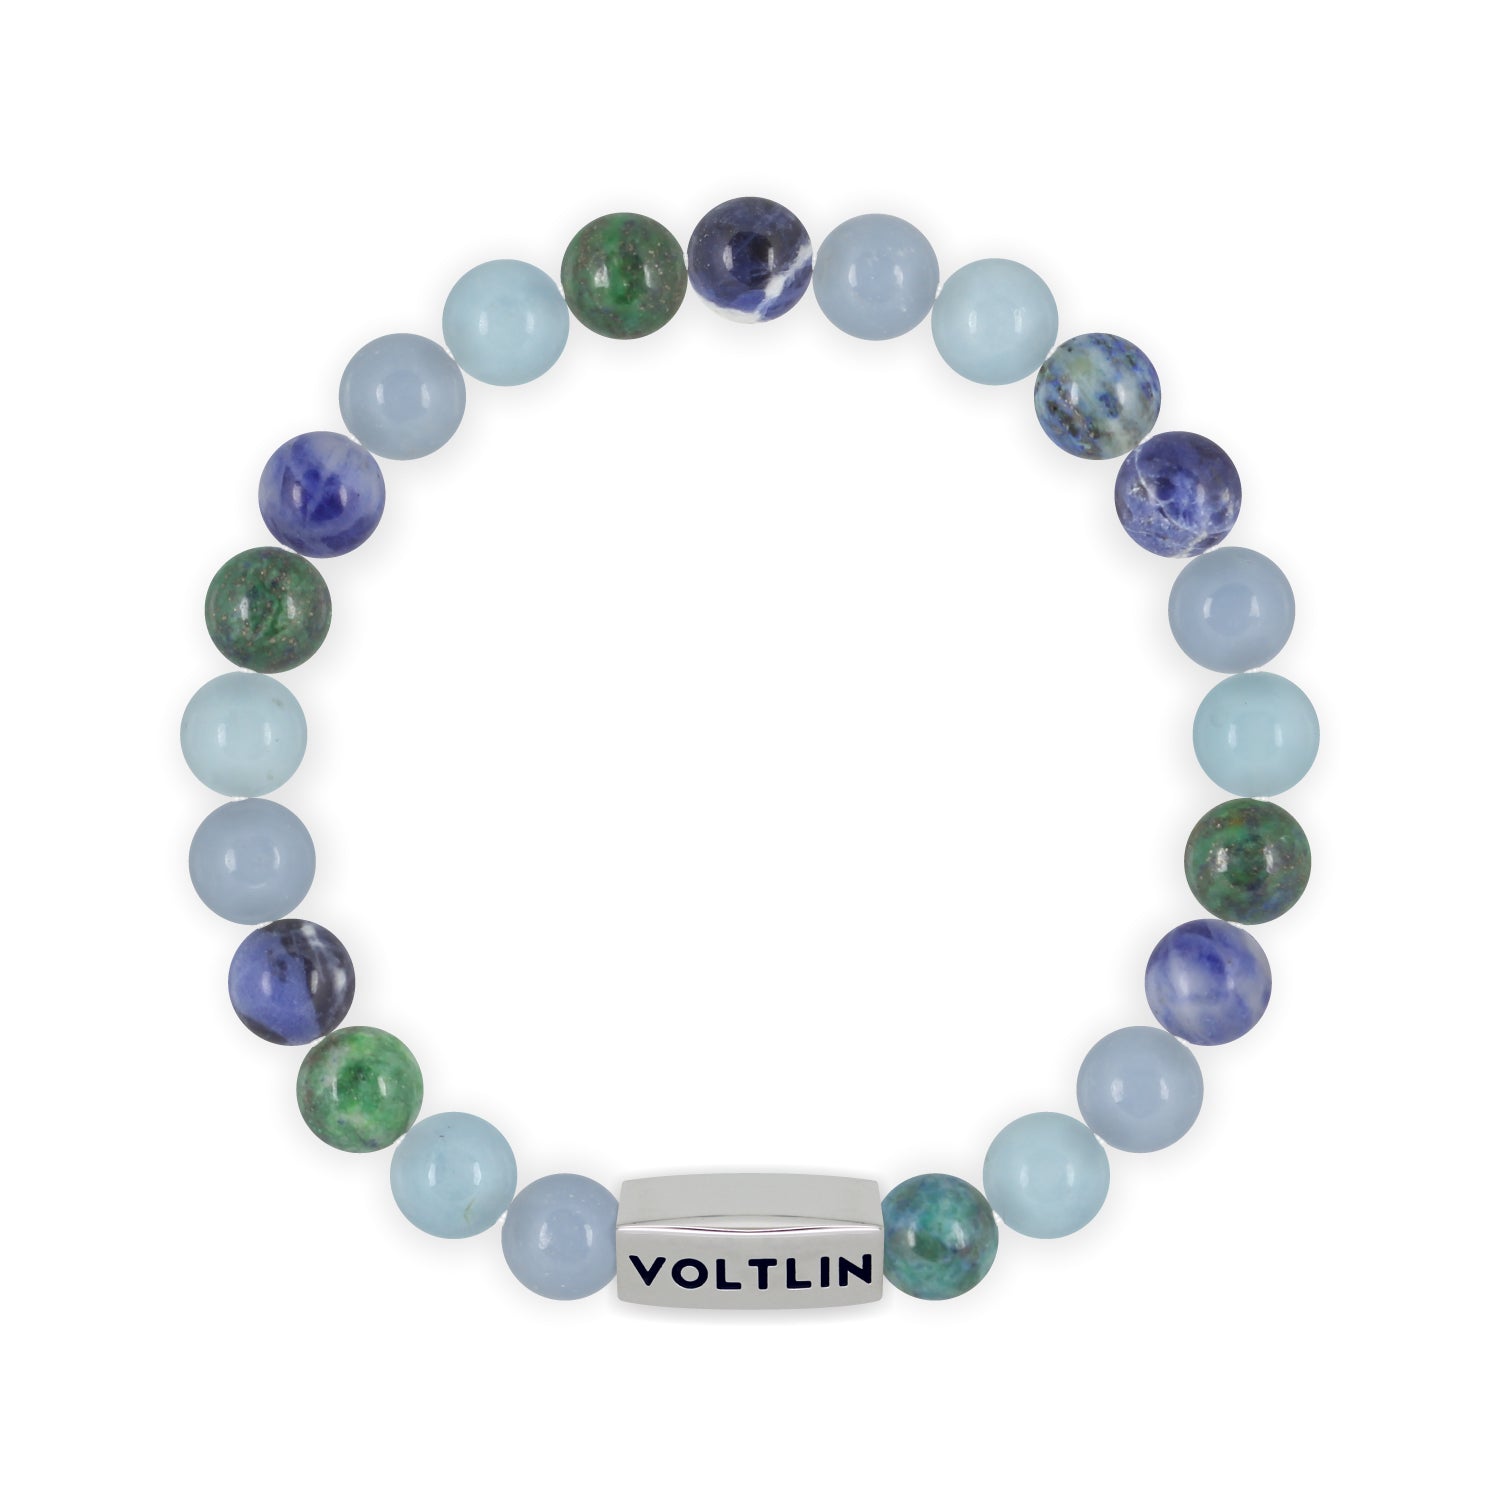 Front view of an 8mm Throat Chakra beaded stretch bracelet featuring Angelite, Aquamarine, Azurite, & Sodalite crystal and silver stainless steel logo bead made by Voltlin